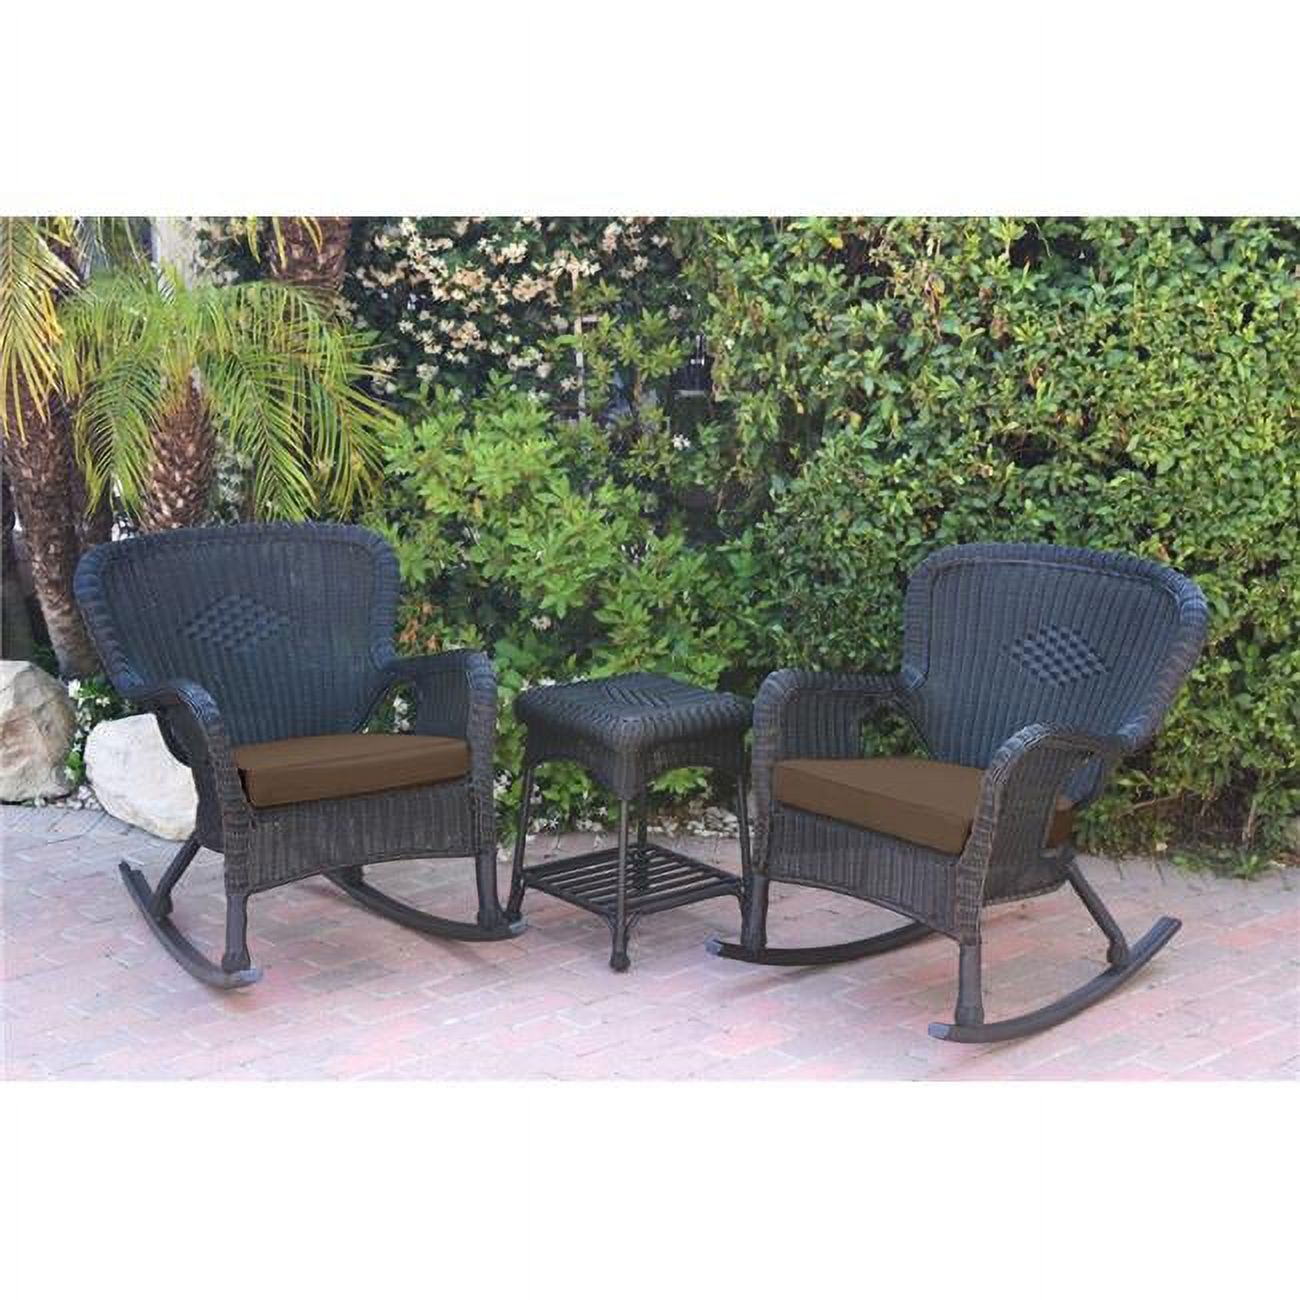 W00214-2-RCES007 Windsor Black Wicker Rocker Chair & End Table Set with Brown Cushion - image 1 of 1